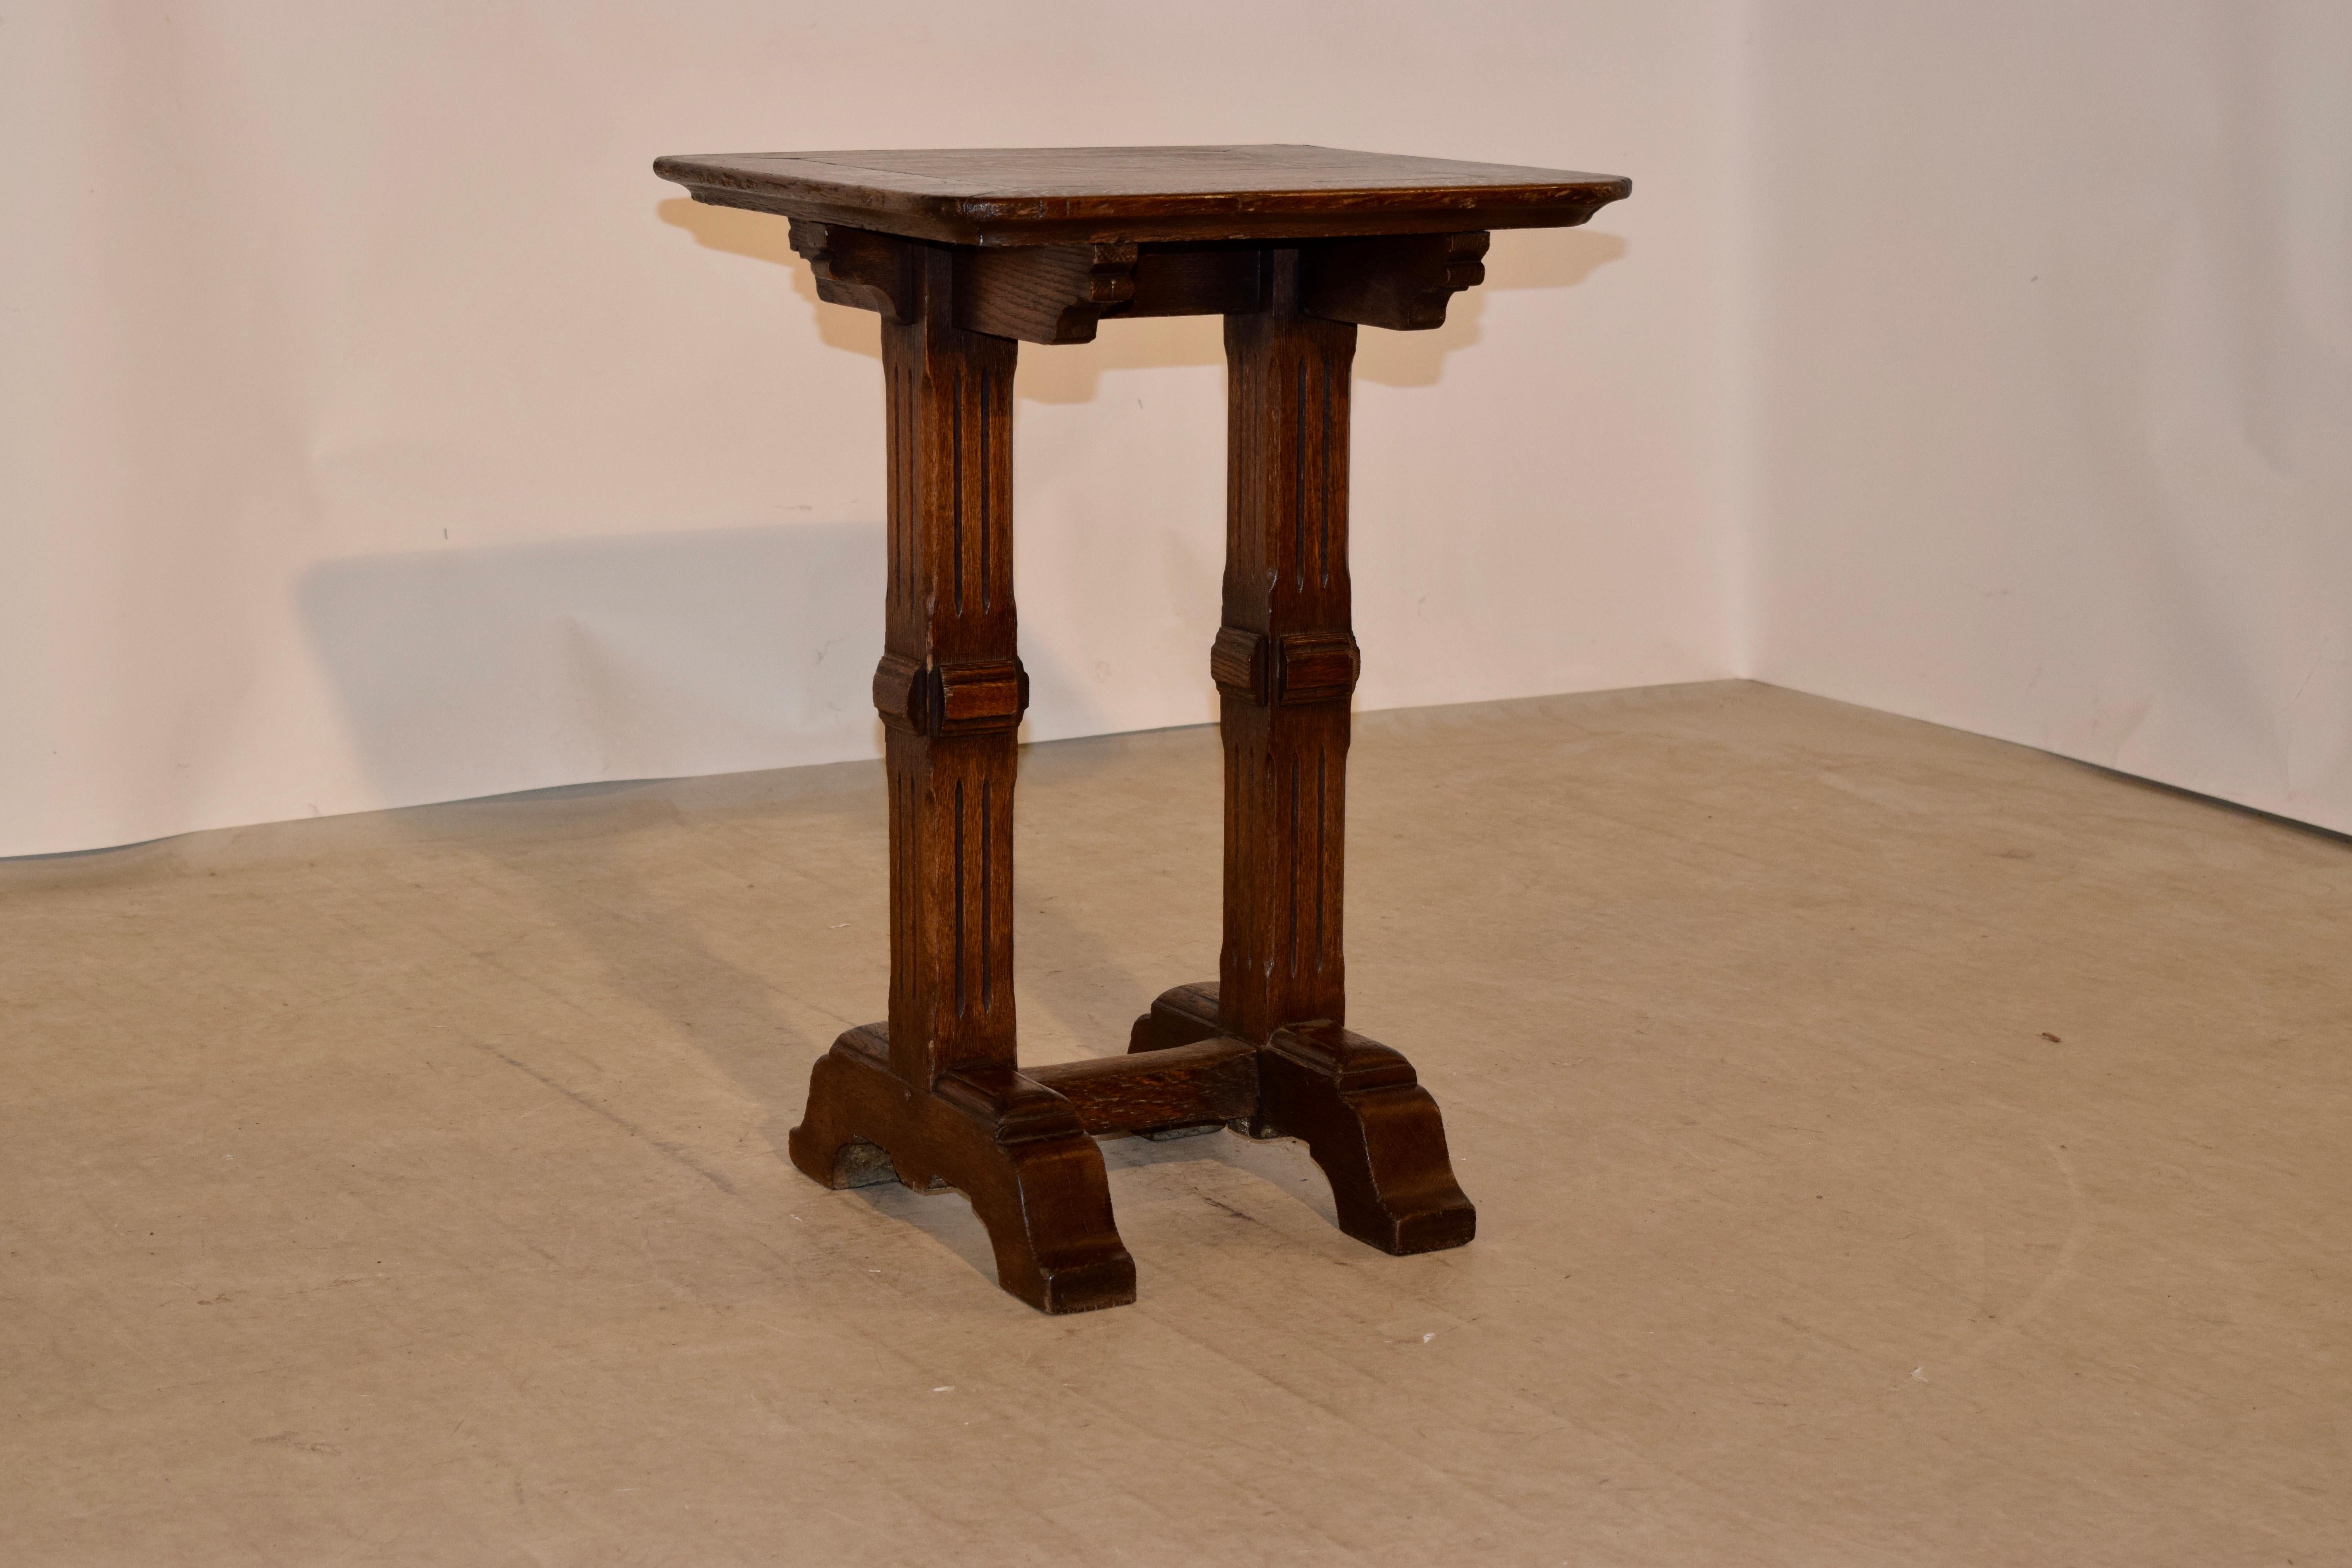 19th Century oak side table from England with a banded top and scalloped brackets over hand carved reeded legs, supported on bracket feet which are joined by a single stretcher.